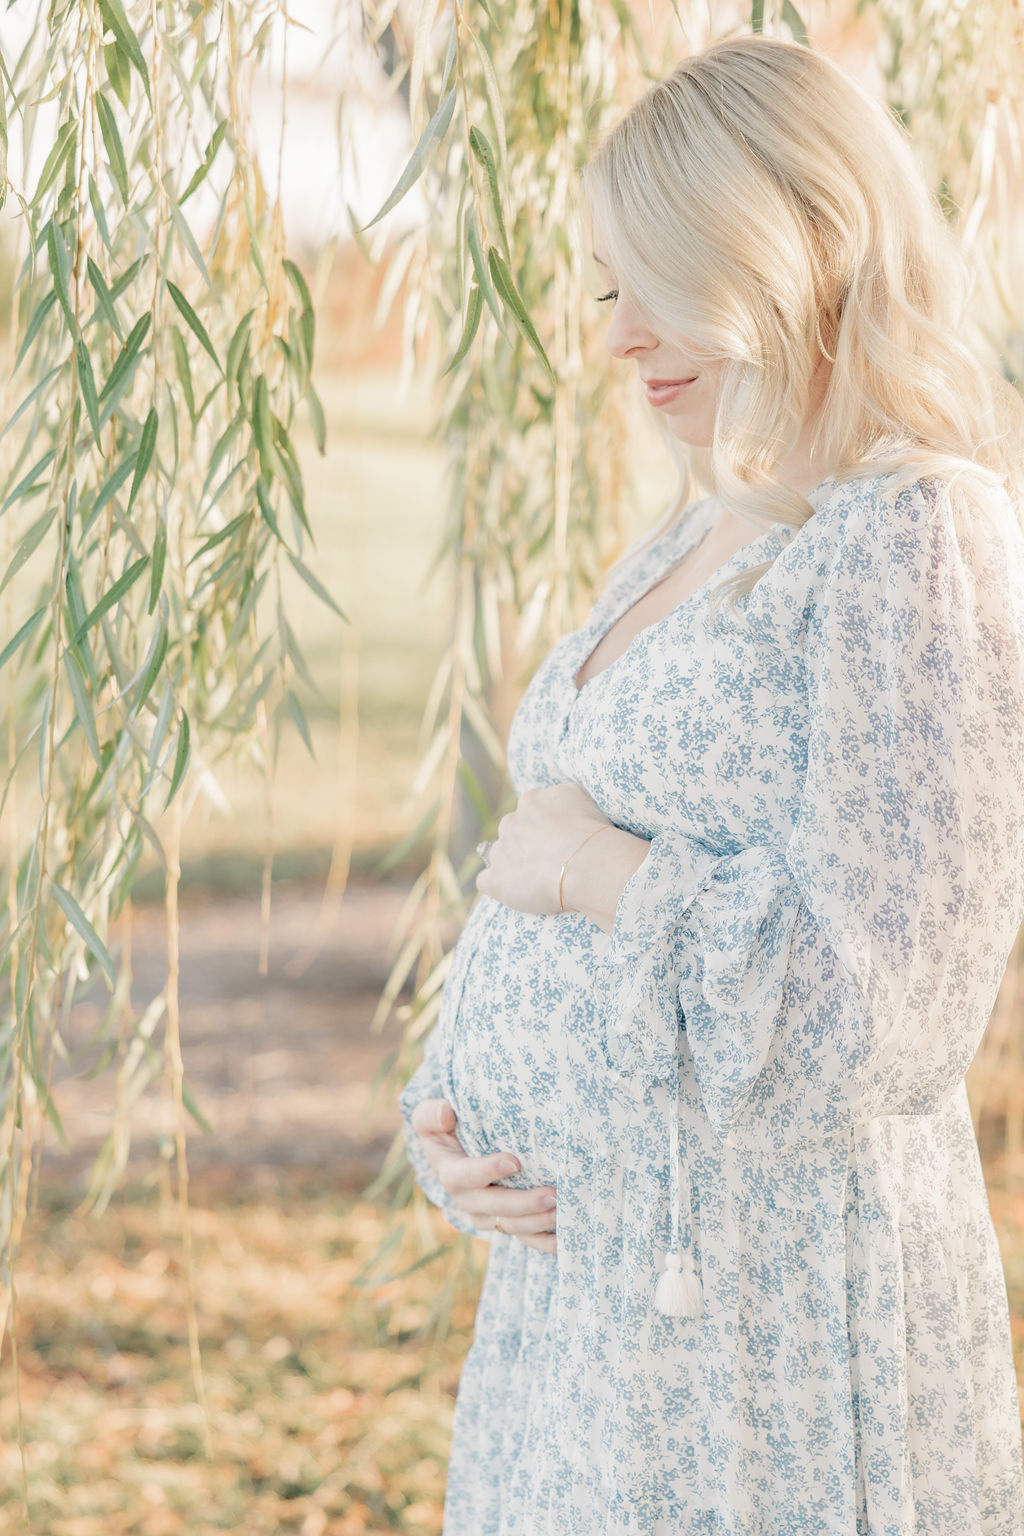 A mother to be in a blue floral dress stands under a willow tree holding her bump at sunset after visiting serene midwifery